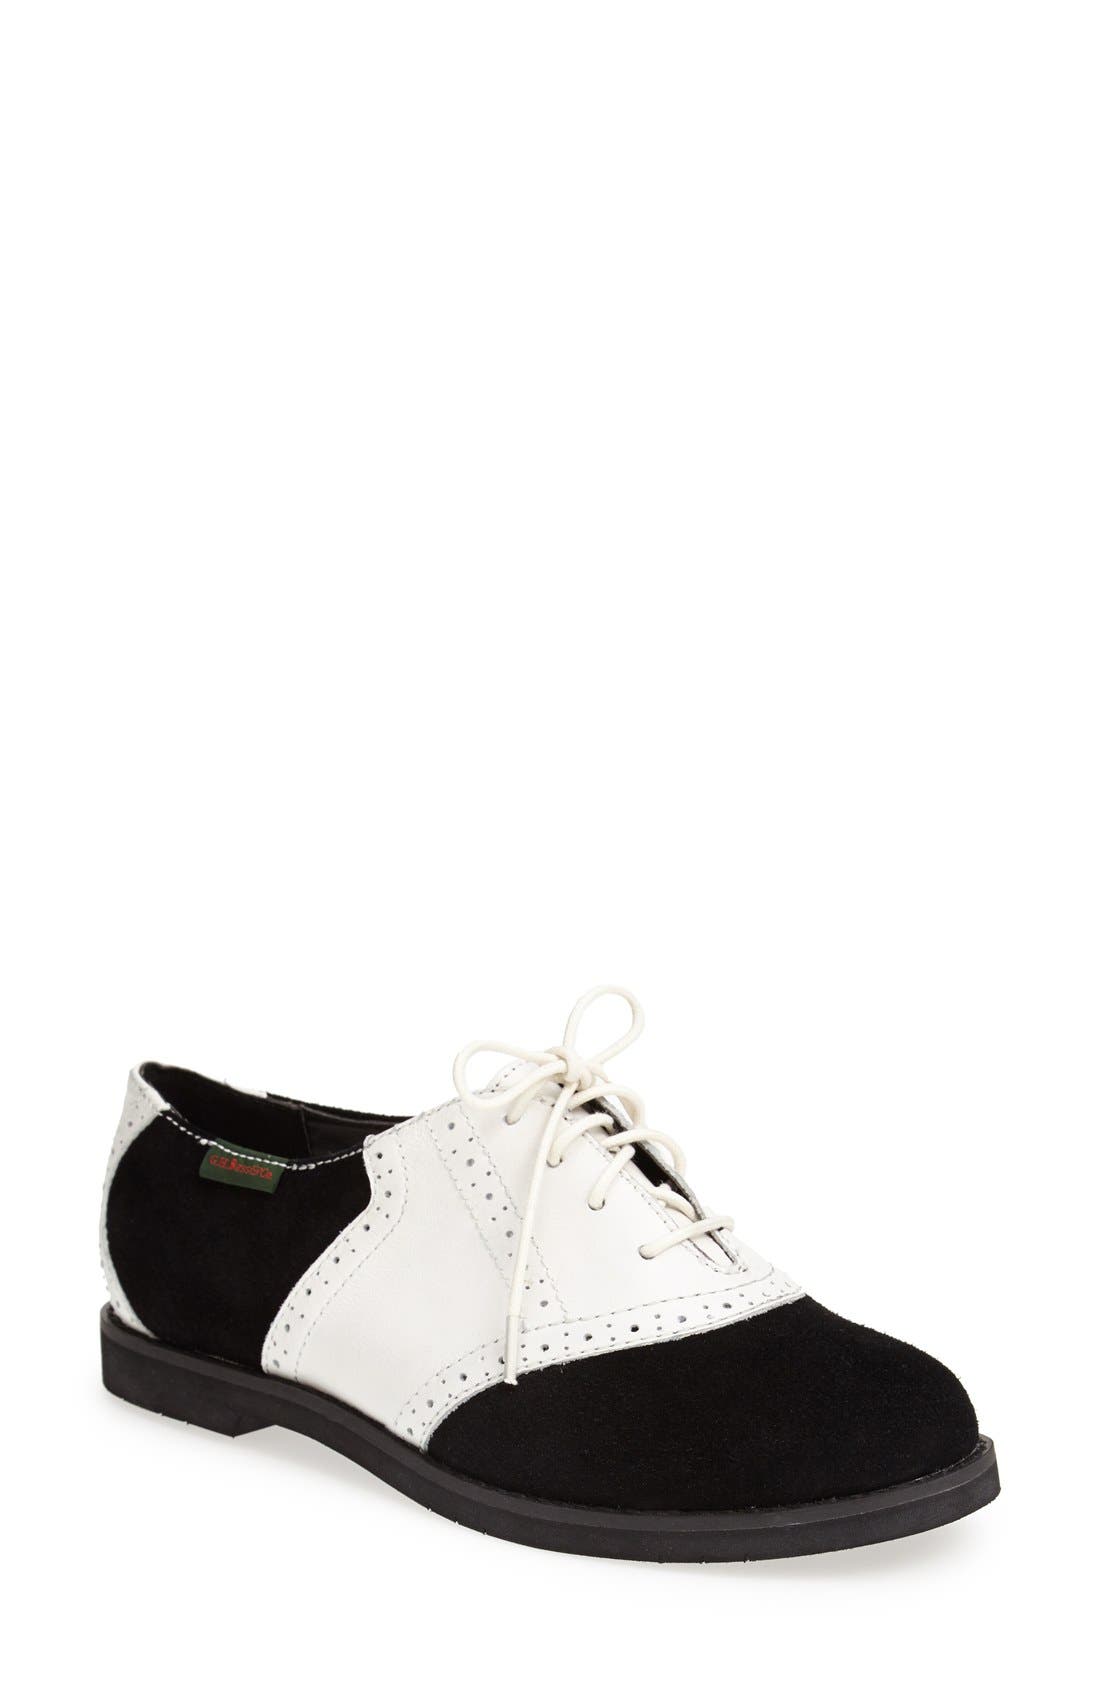 bass black and white saddle oxfords